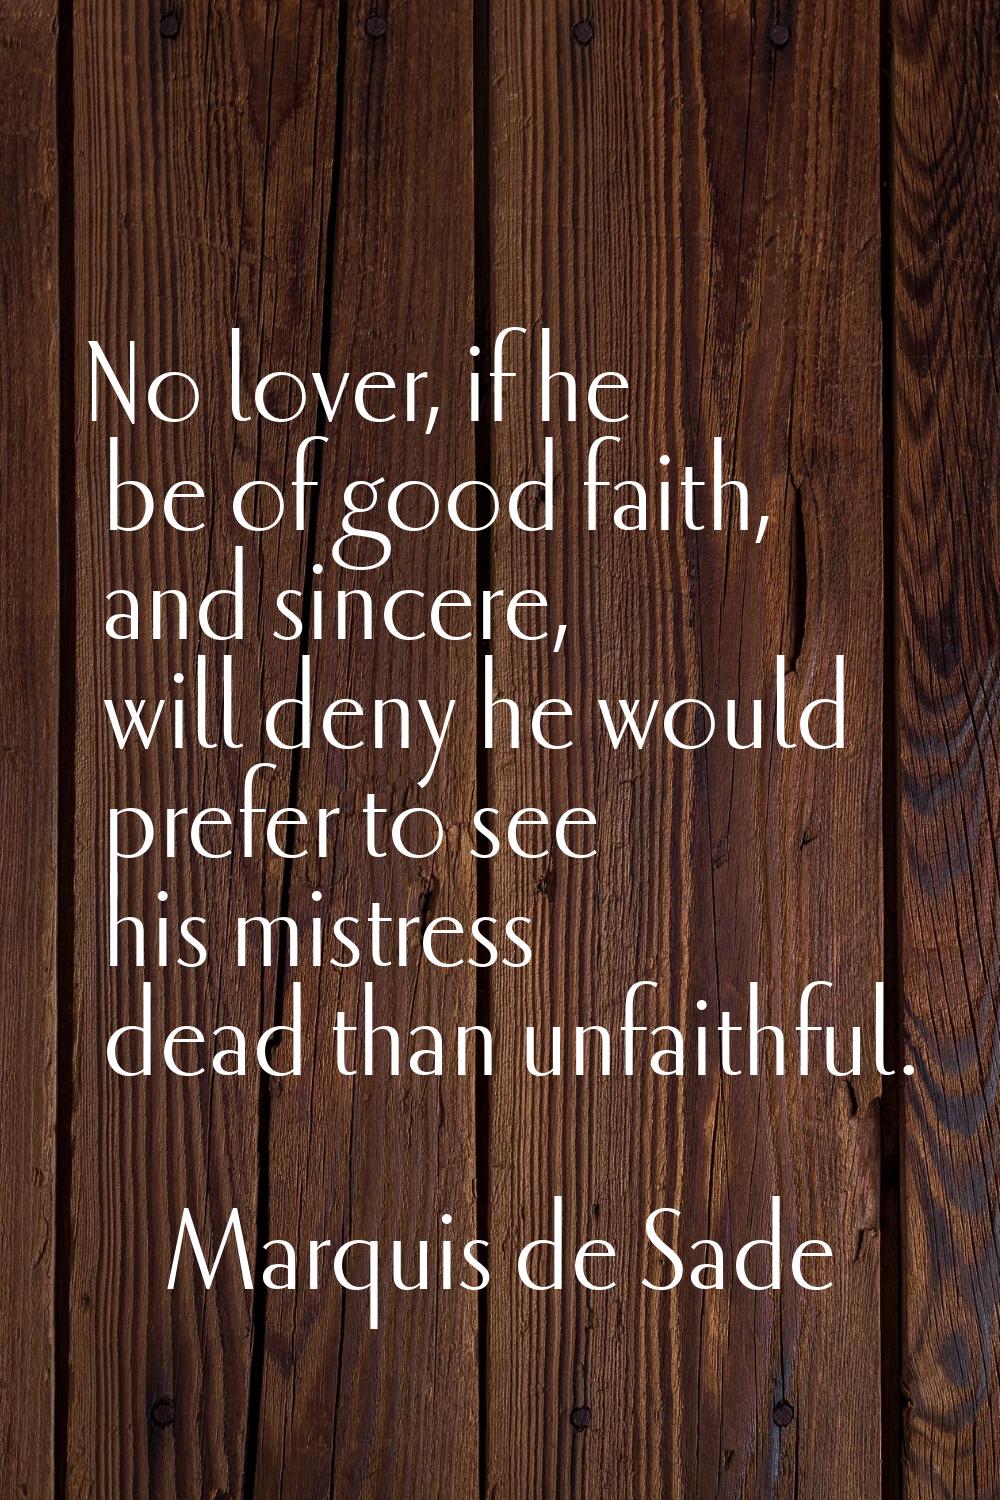 No lover, if he be of good faith, and sincere, will deny he would prefer to see his mistress dead t